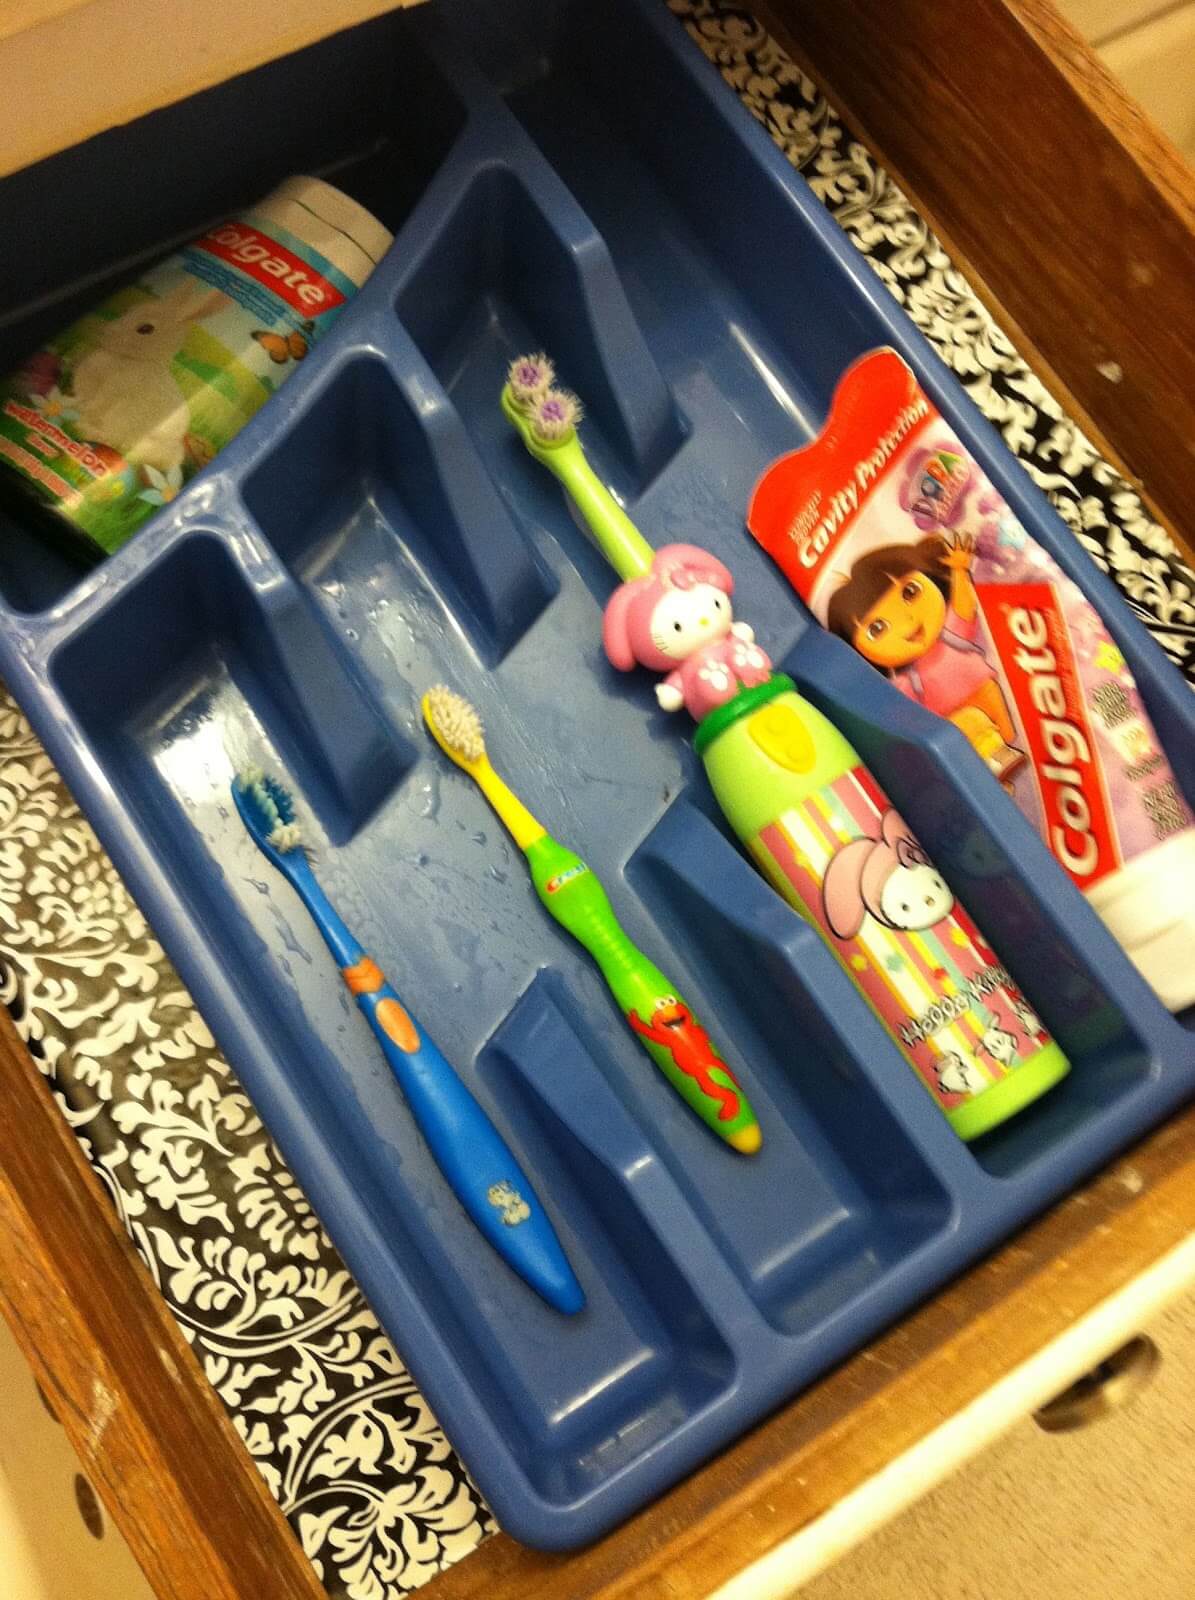 Cutlery Holder Organizes Toothbrushes and Toothpaste